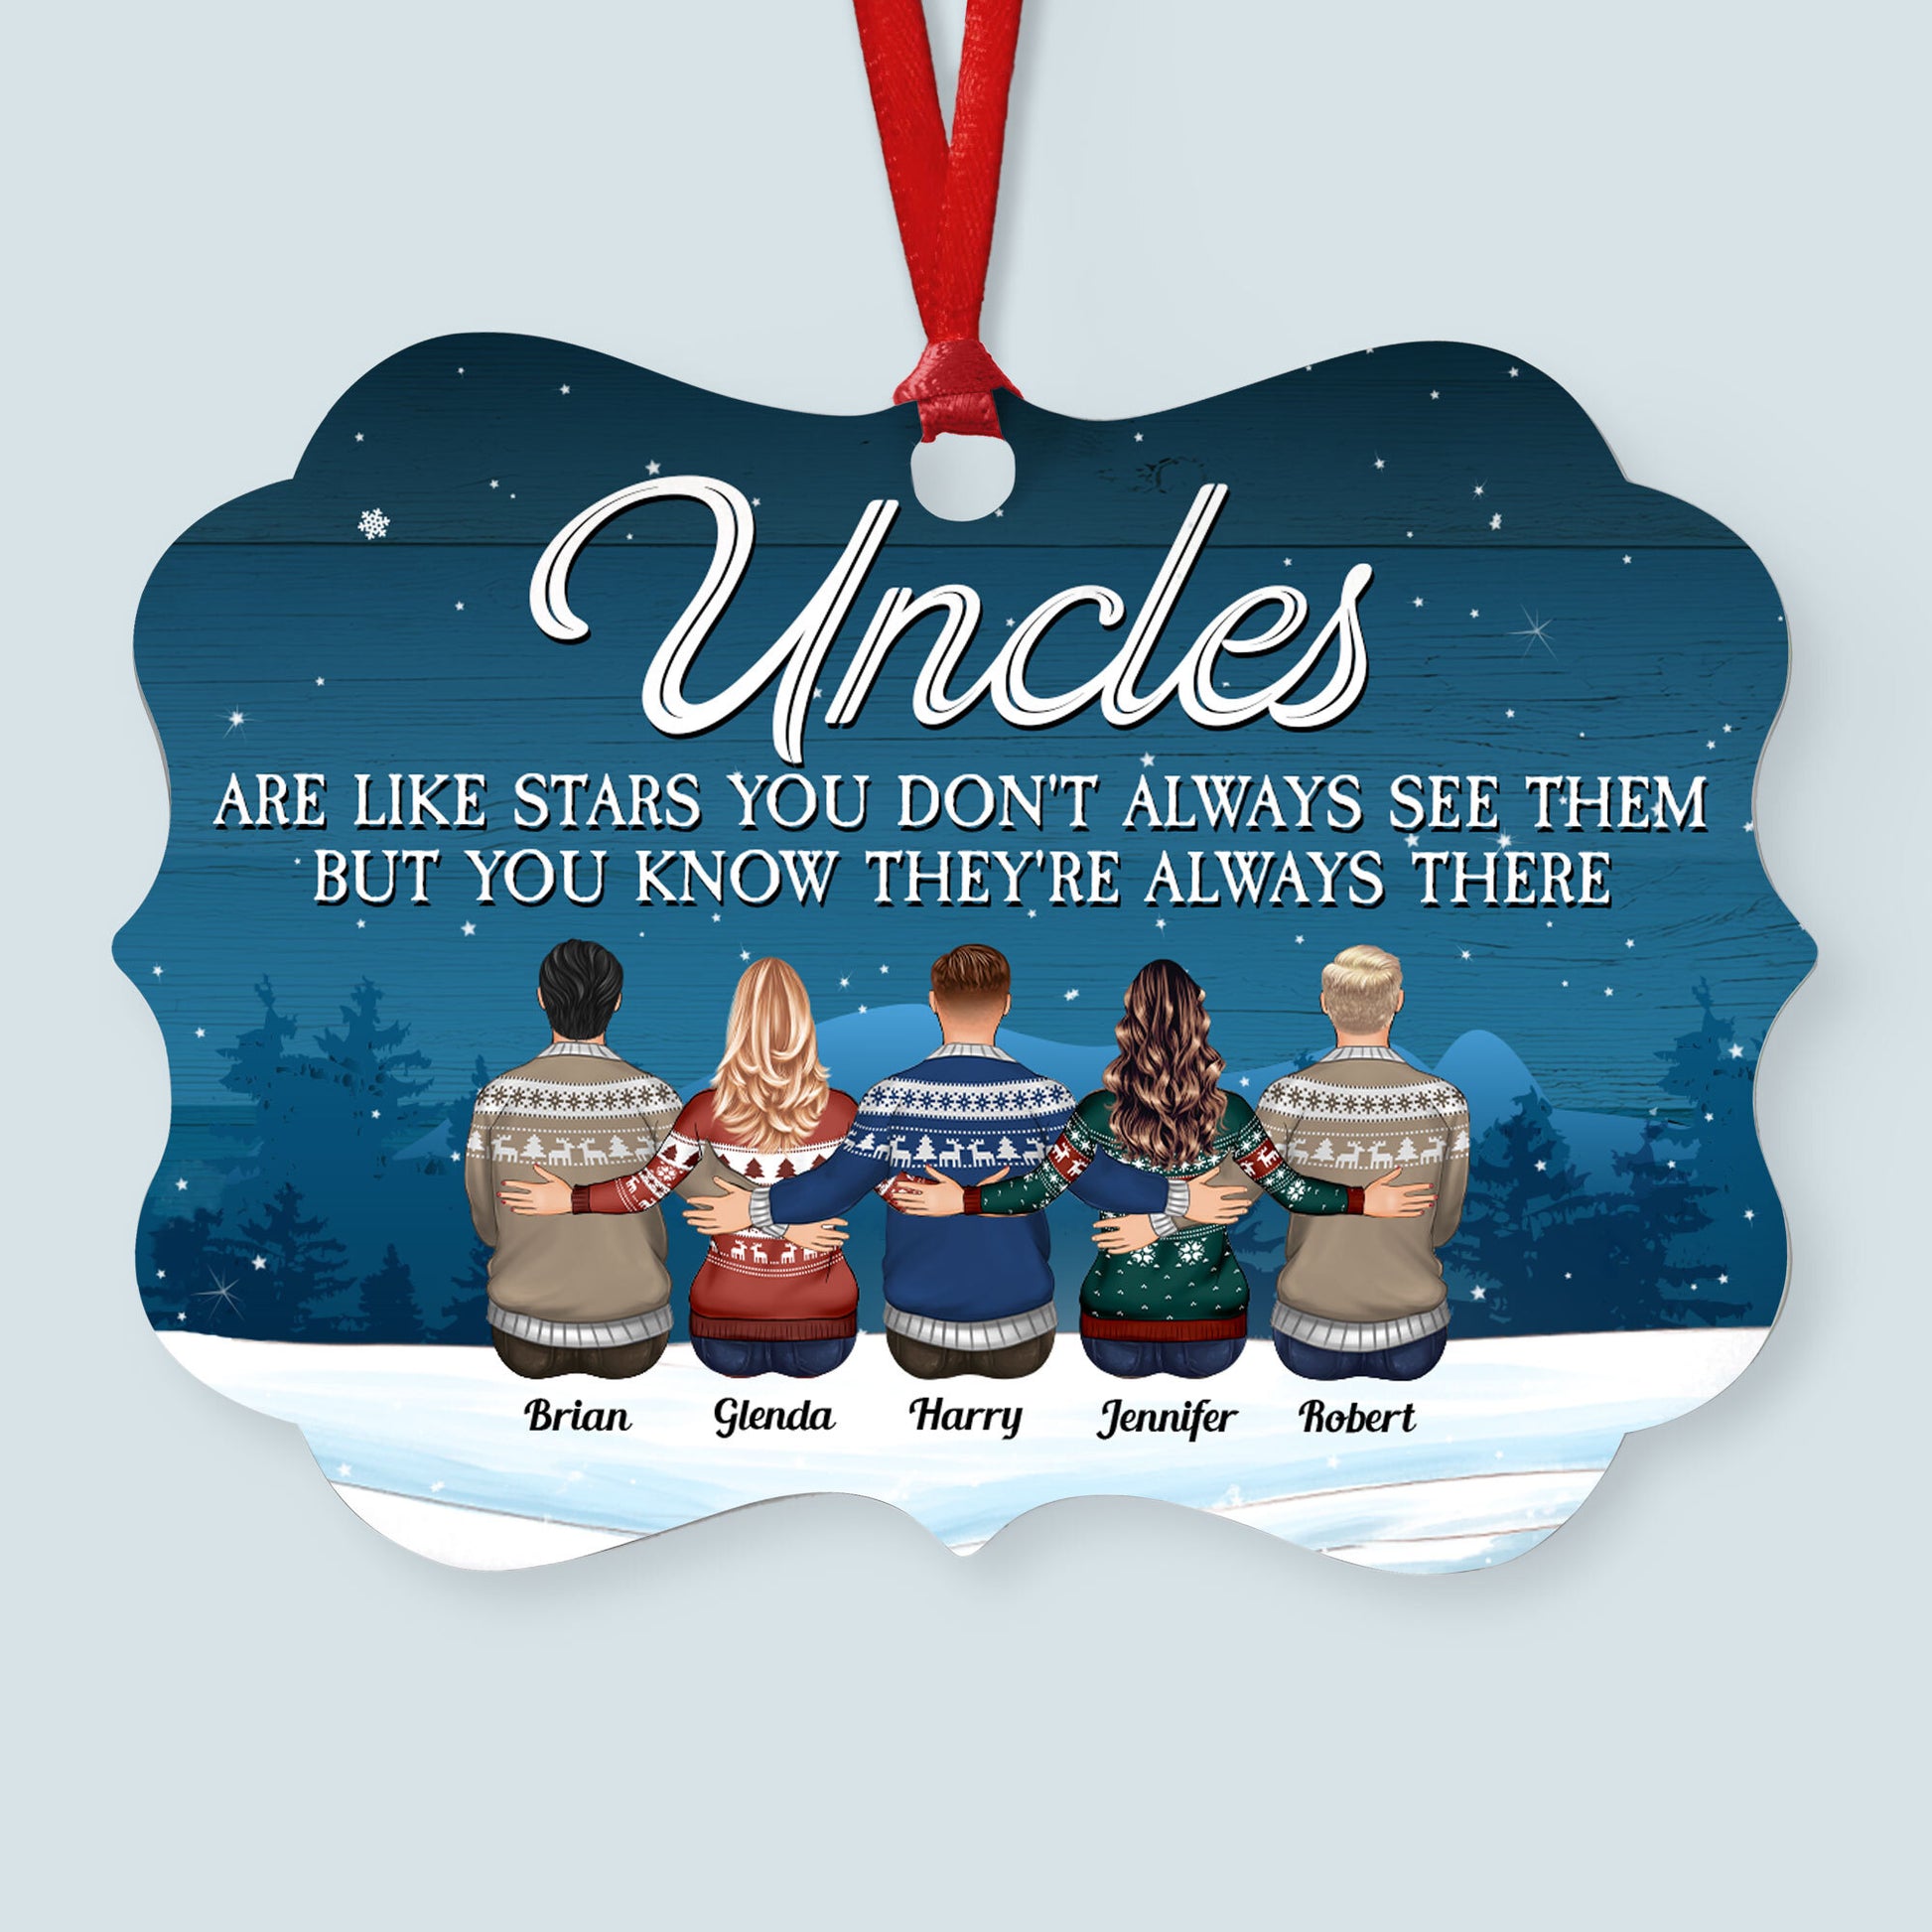 Uncles Like You Are Precious And Few - Personalized Aluminum Ornament - Christmas Gift For Uncles, Gift For Aunts, Gift For Cousins, Gift For Family - Family Hugging